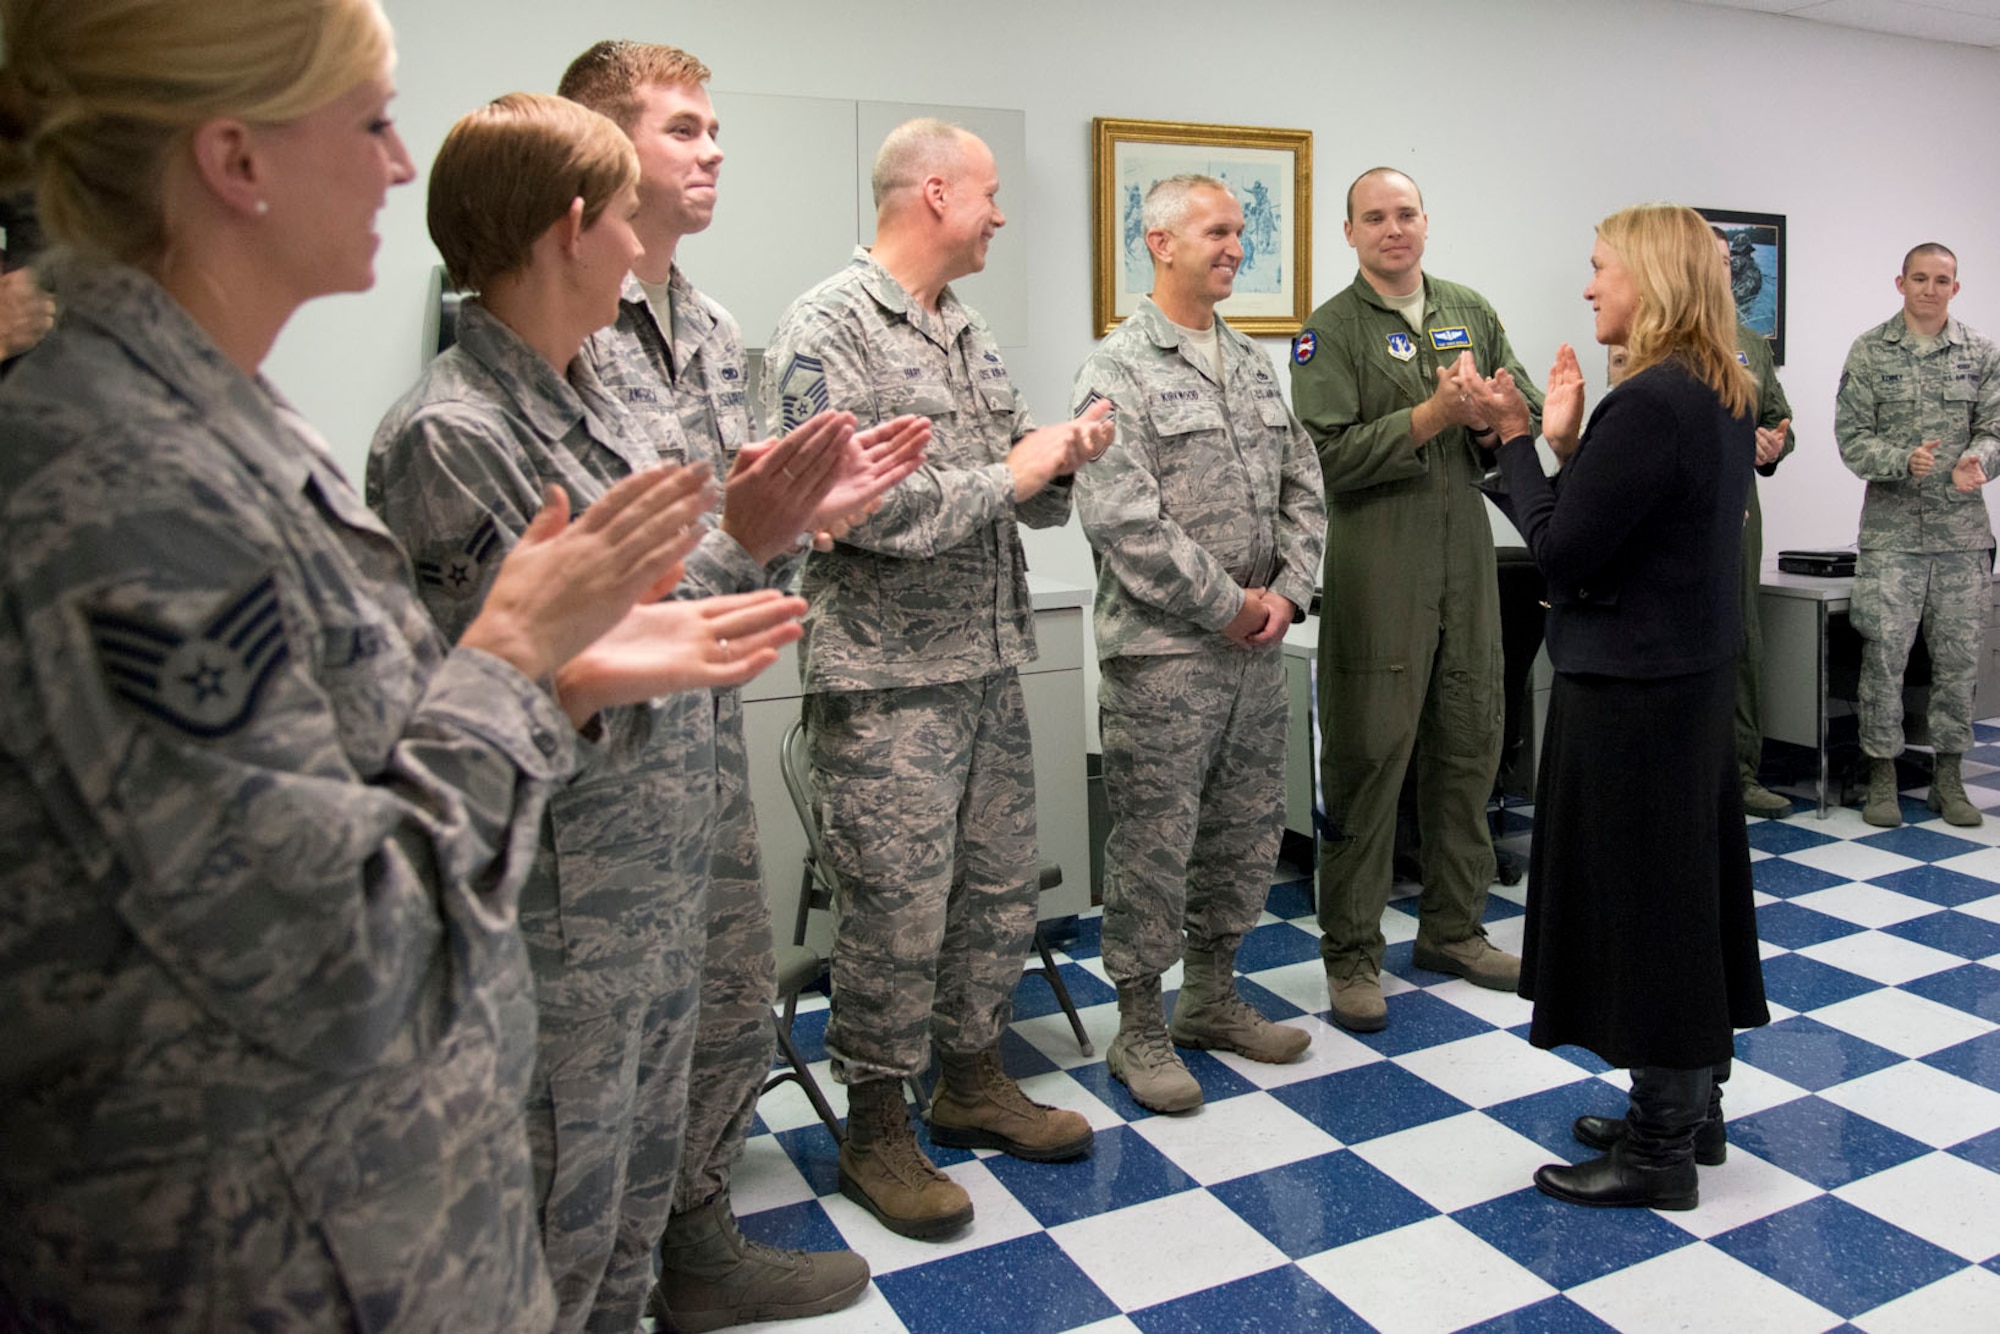 MARTINSBURG, W.Va.-- Secretary of the Air Force Deborah Lee James and Airmen from the 167th Airlift Wing, Martinsburg, W.Va, applaud Senior Master Sgt. Todd Kirkwood, 167th Outstanding Honor Guard Airman of the Year 2015, for celebrating his 30th anniversary of serving in the military. (U.S. Air National Guard photo by Staff Sgt. Jodie Witmer /Released)